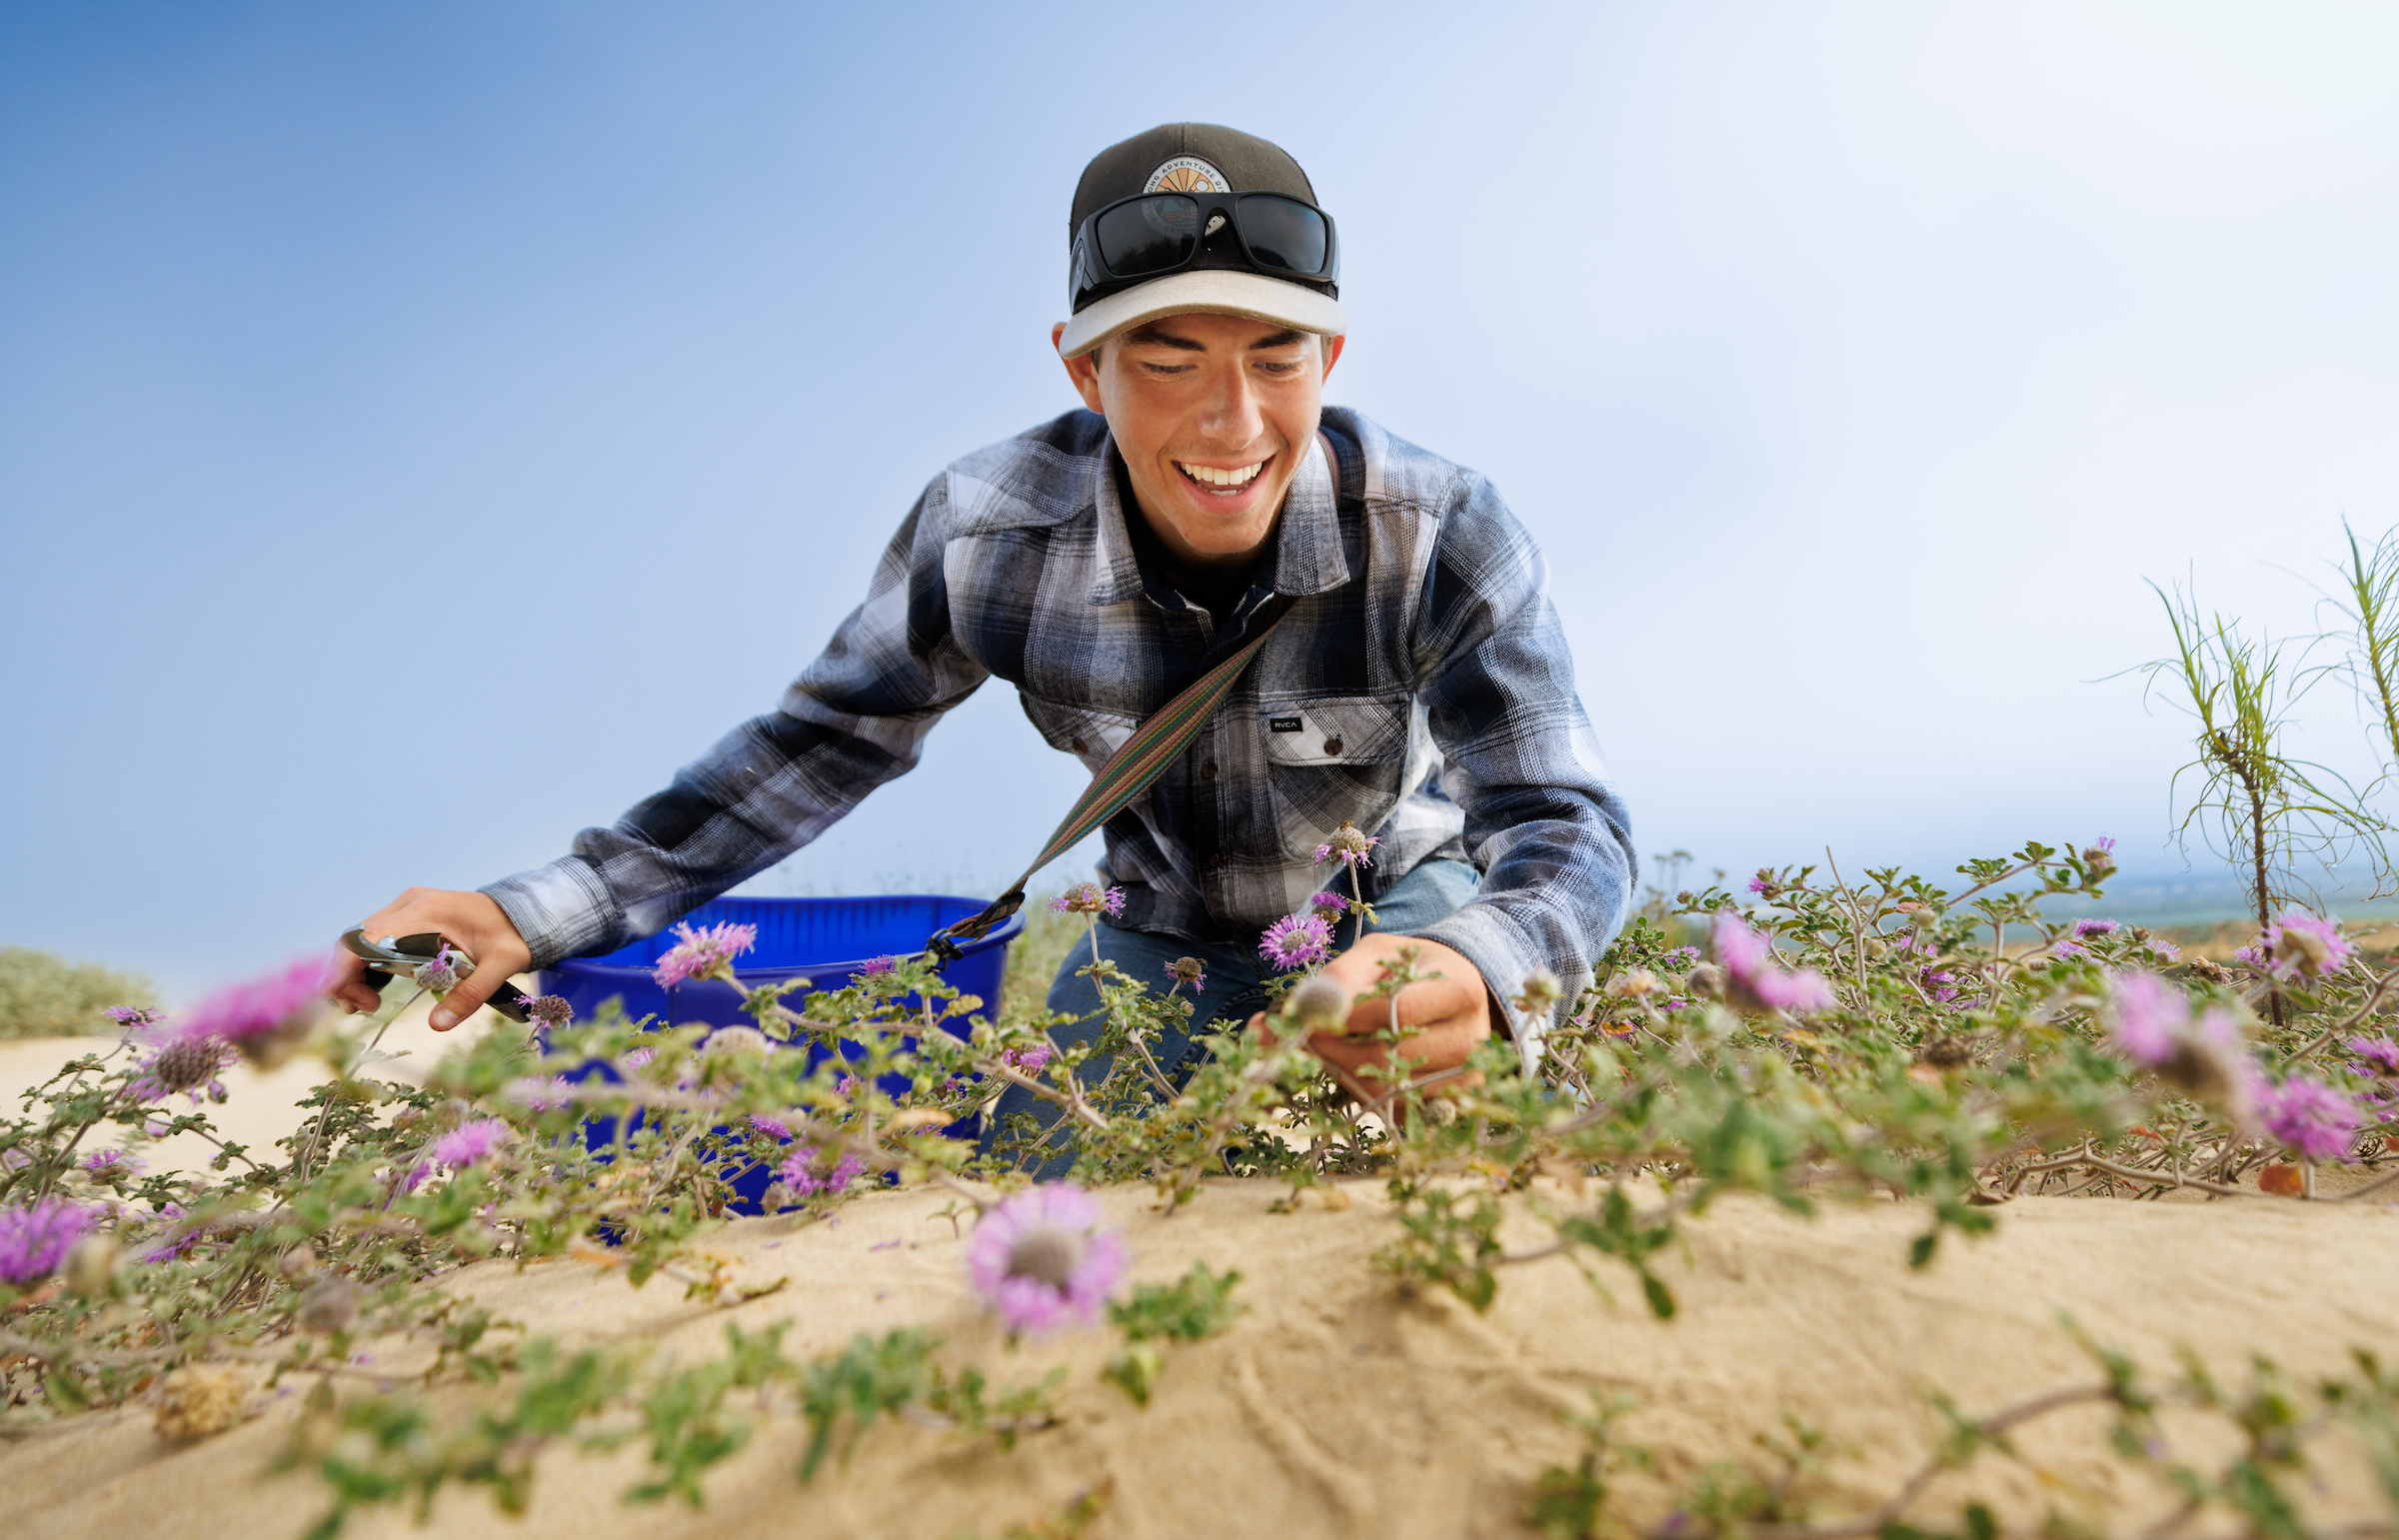 A student wearing a blue plaid shirt smiles as he uses gardening clippers to harvest seeds from a plant with purple flowers growing in a sand dune.